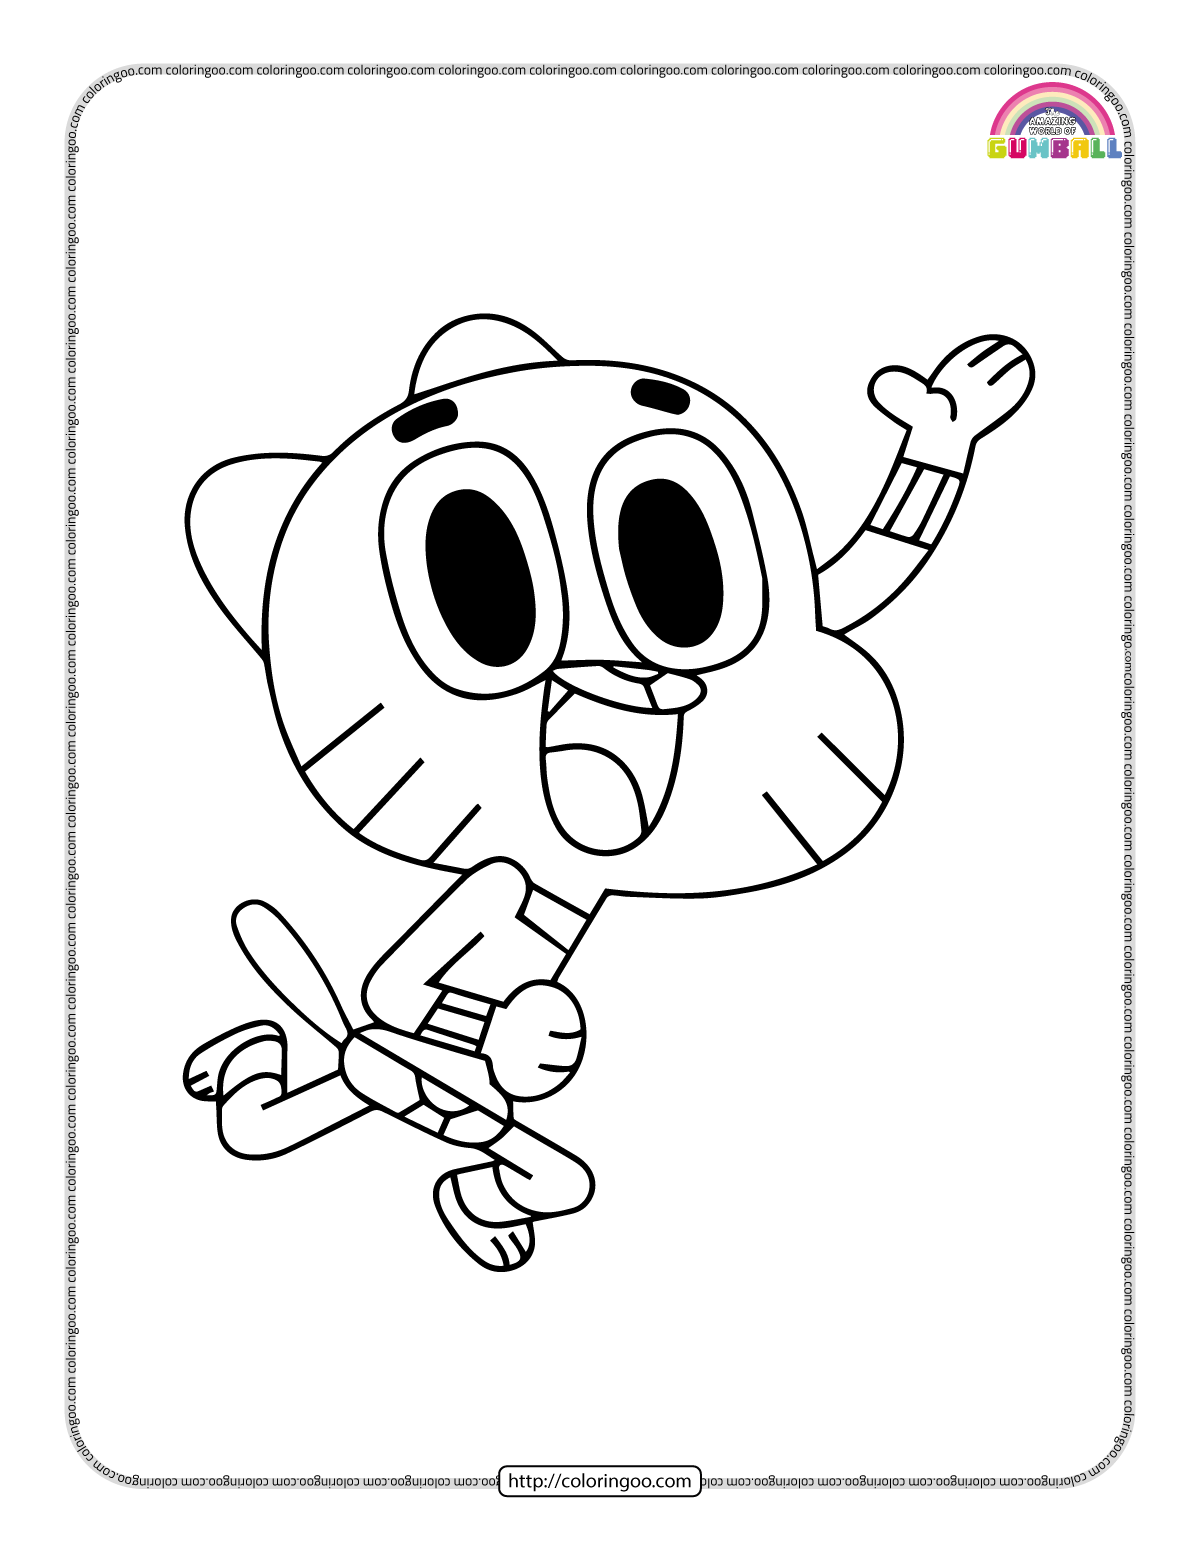 gumball greets kids coloring page